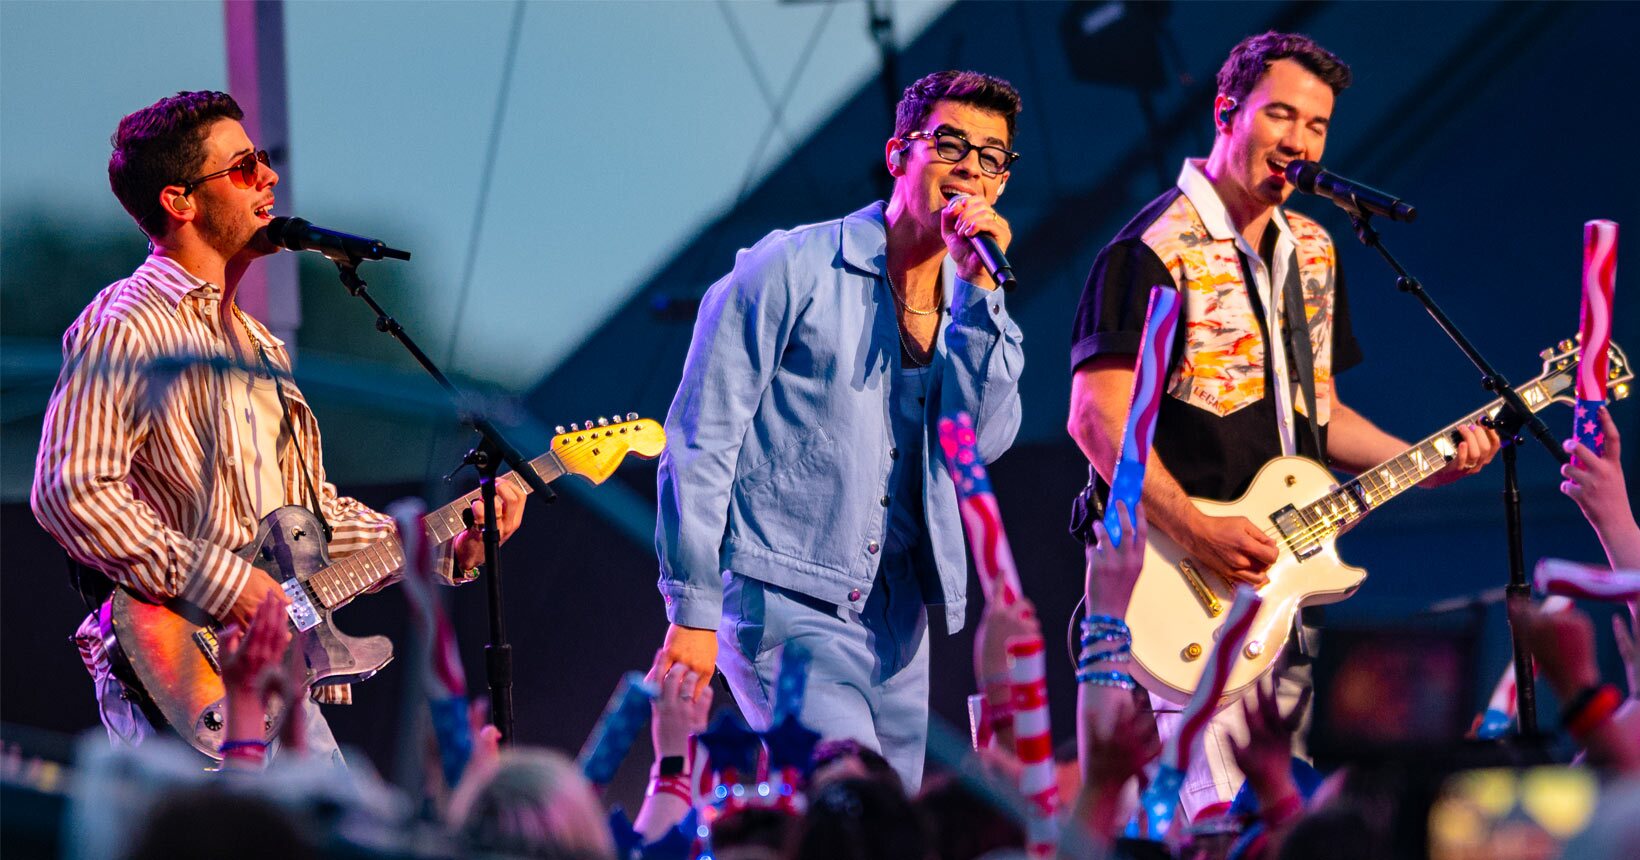 11 hotels with exclusive discounts for the Jonas Brothers concert in São Paulo